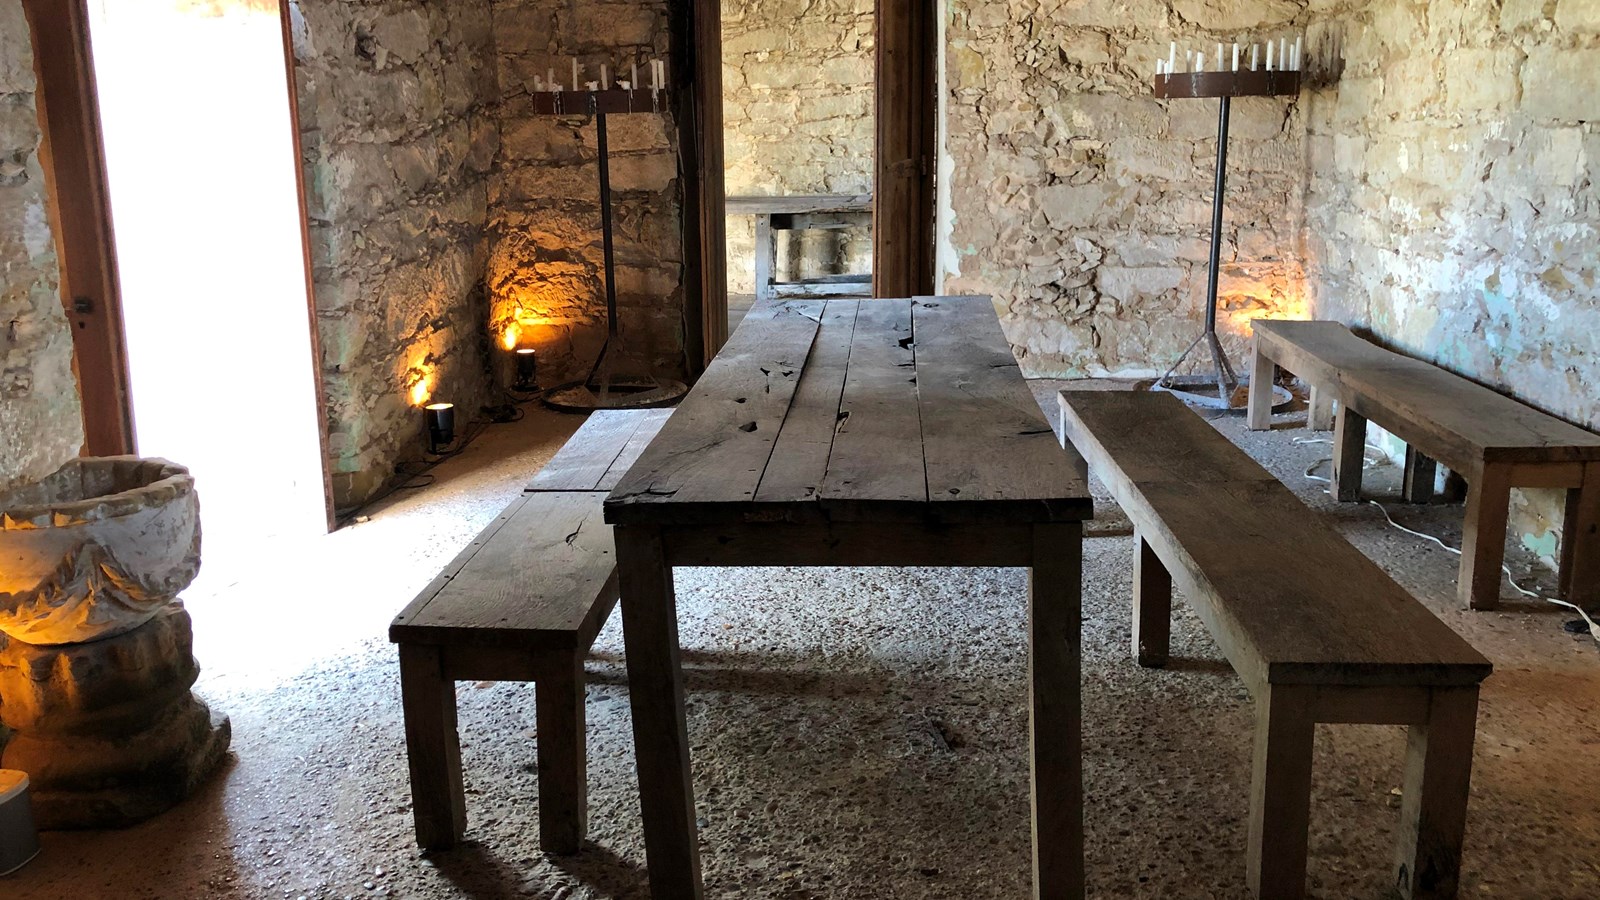 A wooden table sits in the middle of a small room with stone walls.